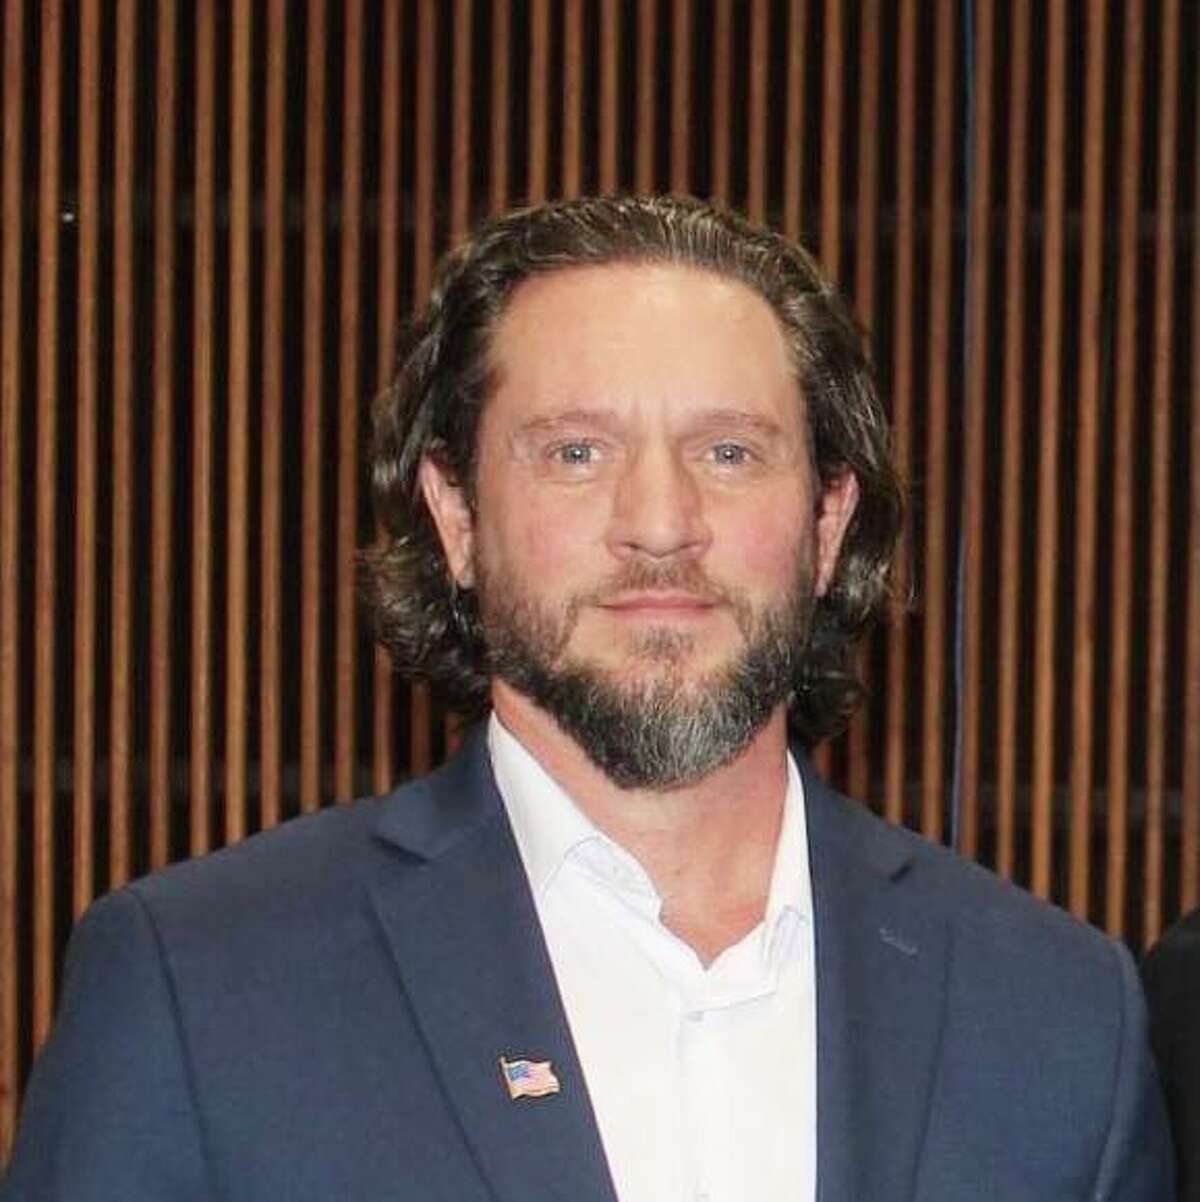 Local parent and entrepreneur Brian Nepveux has thrown his hat into the ring for the Beaumont ISD school board District 4 trustee race.